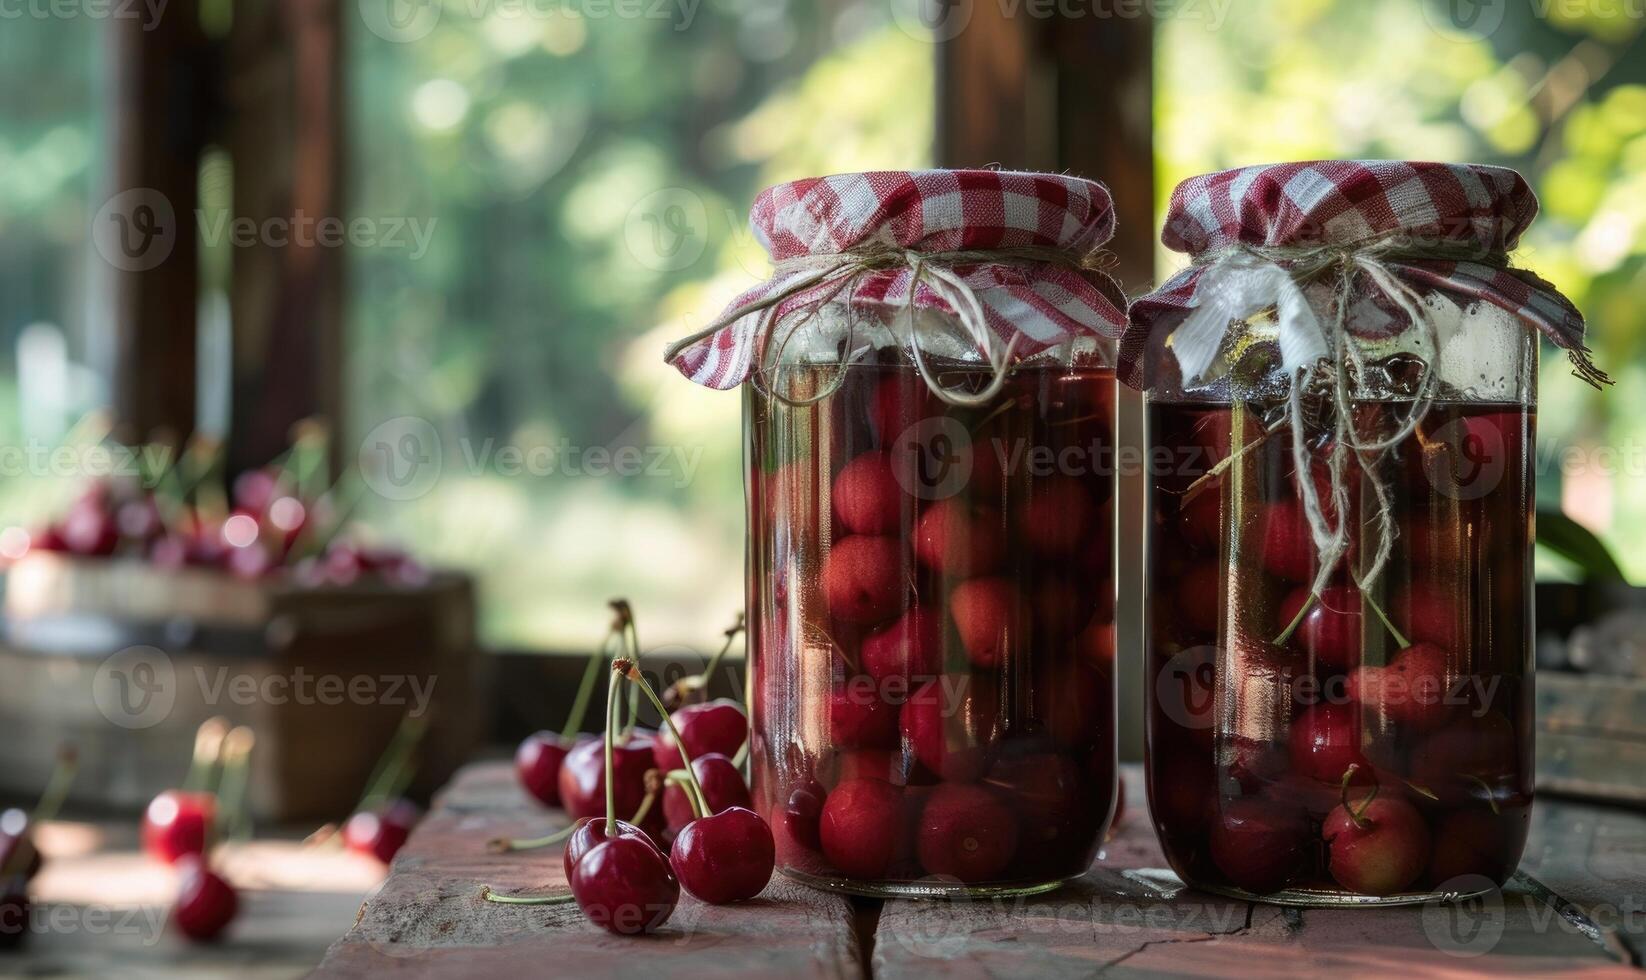 Ripe cherries showcased in a glass jar filled with clear syrup photo